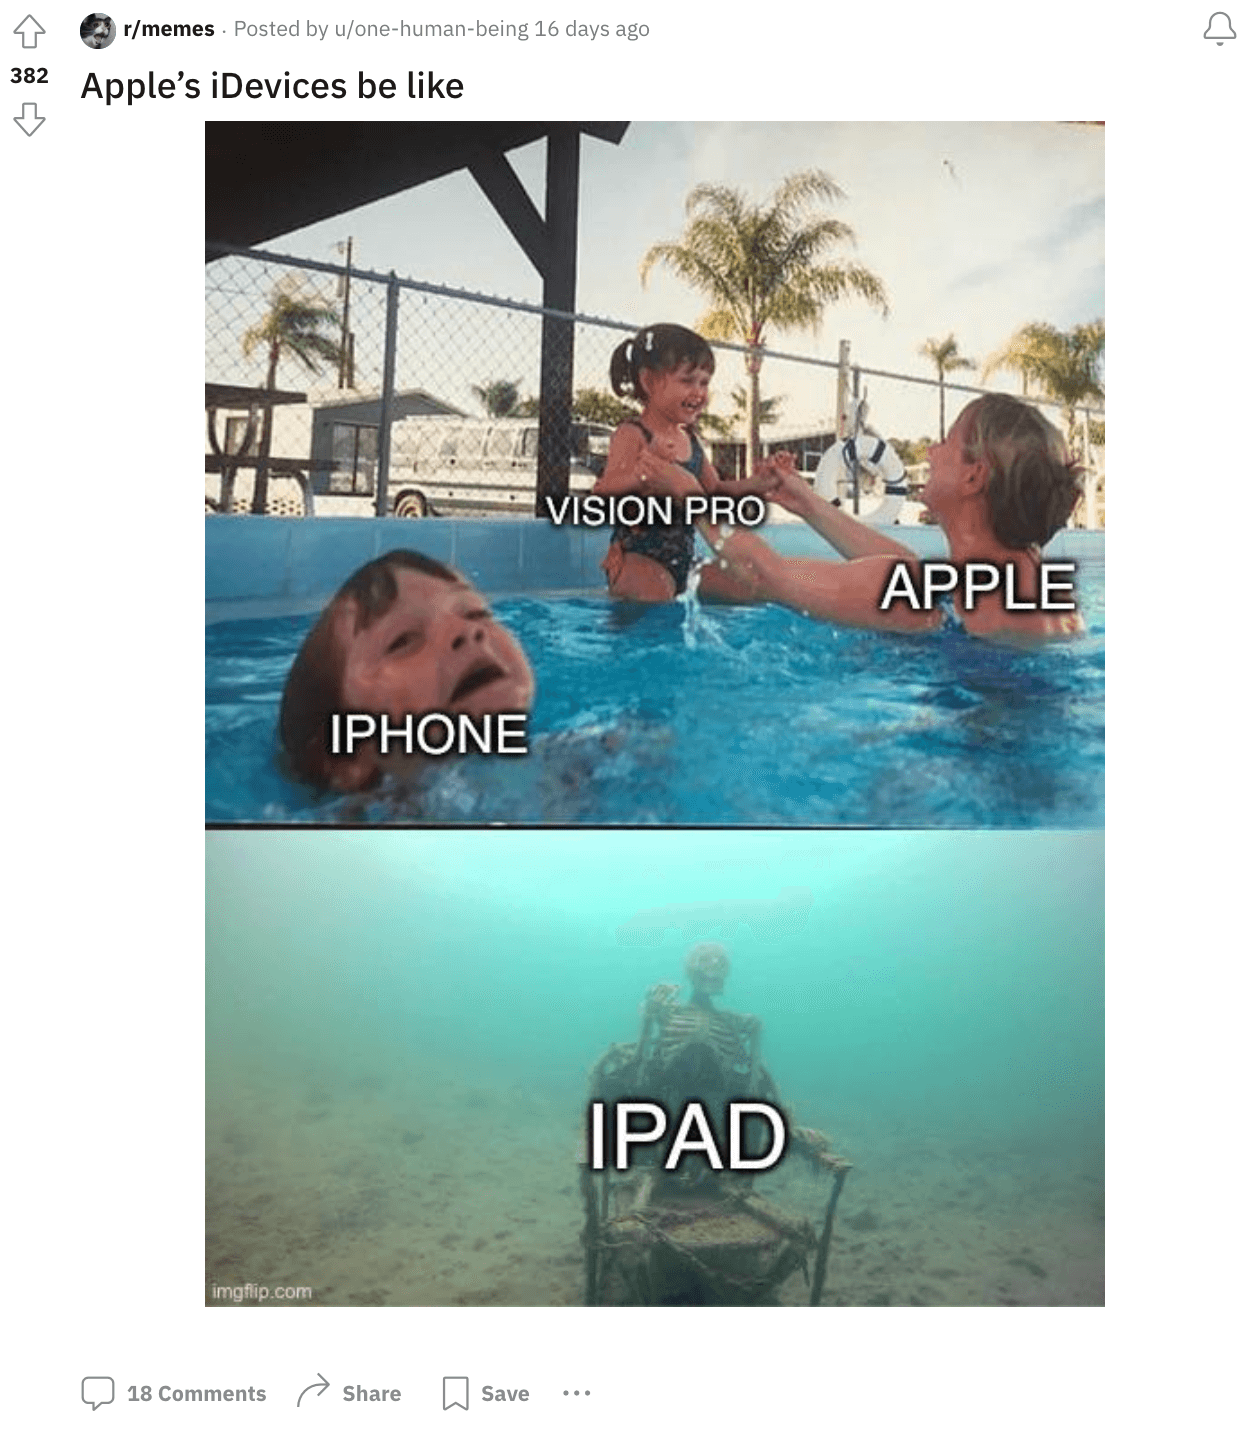 An iDevice-related meme from Reddit